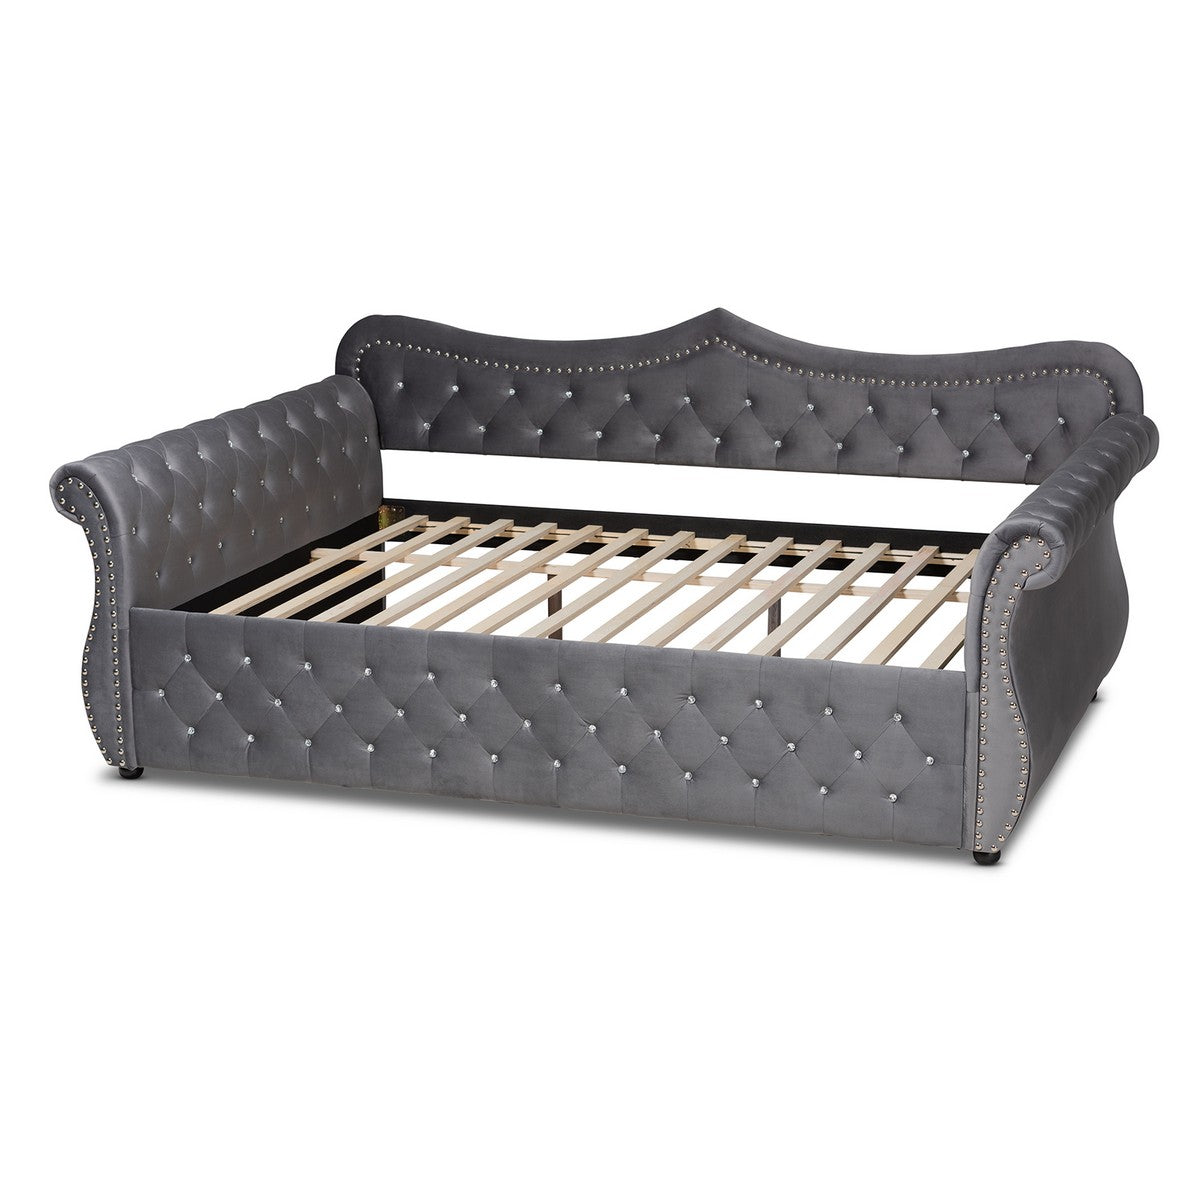 Baxton Studio Abbie Traditional and Transitional Grey Velvet Fabric Upholstered and Crystal Tufted Full Size Daybed